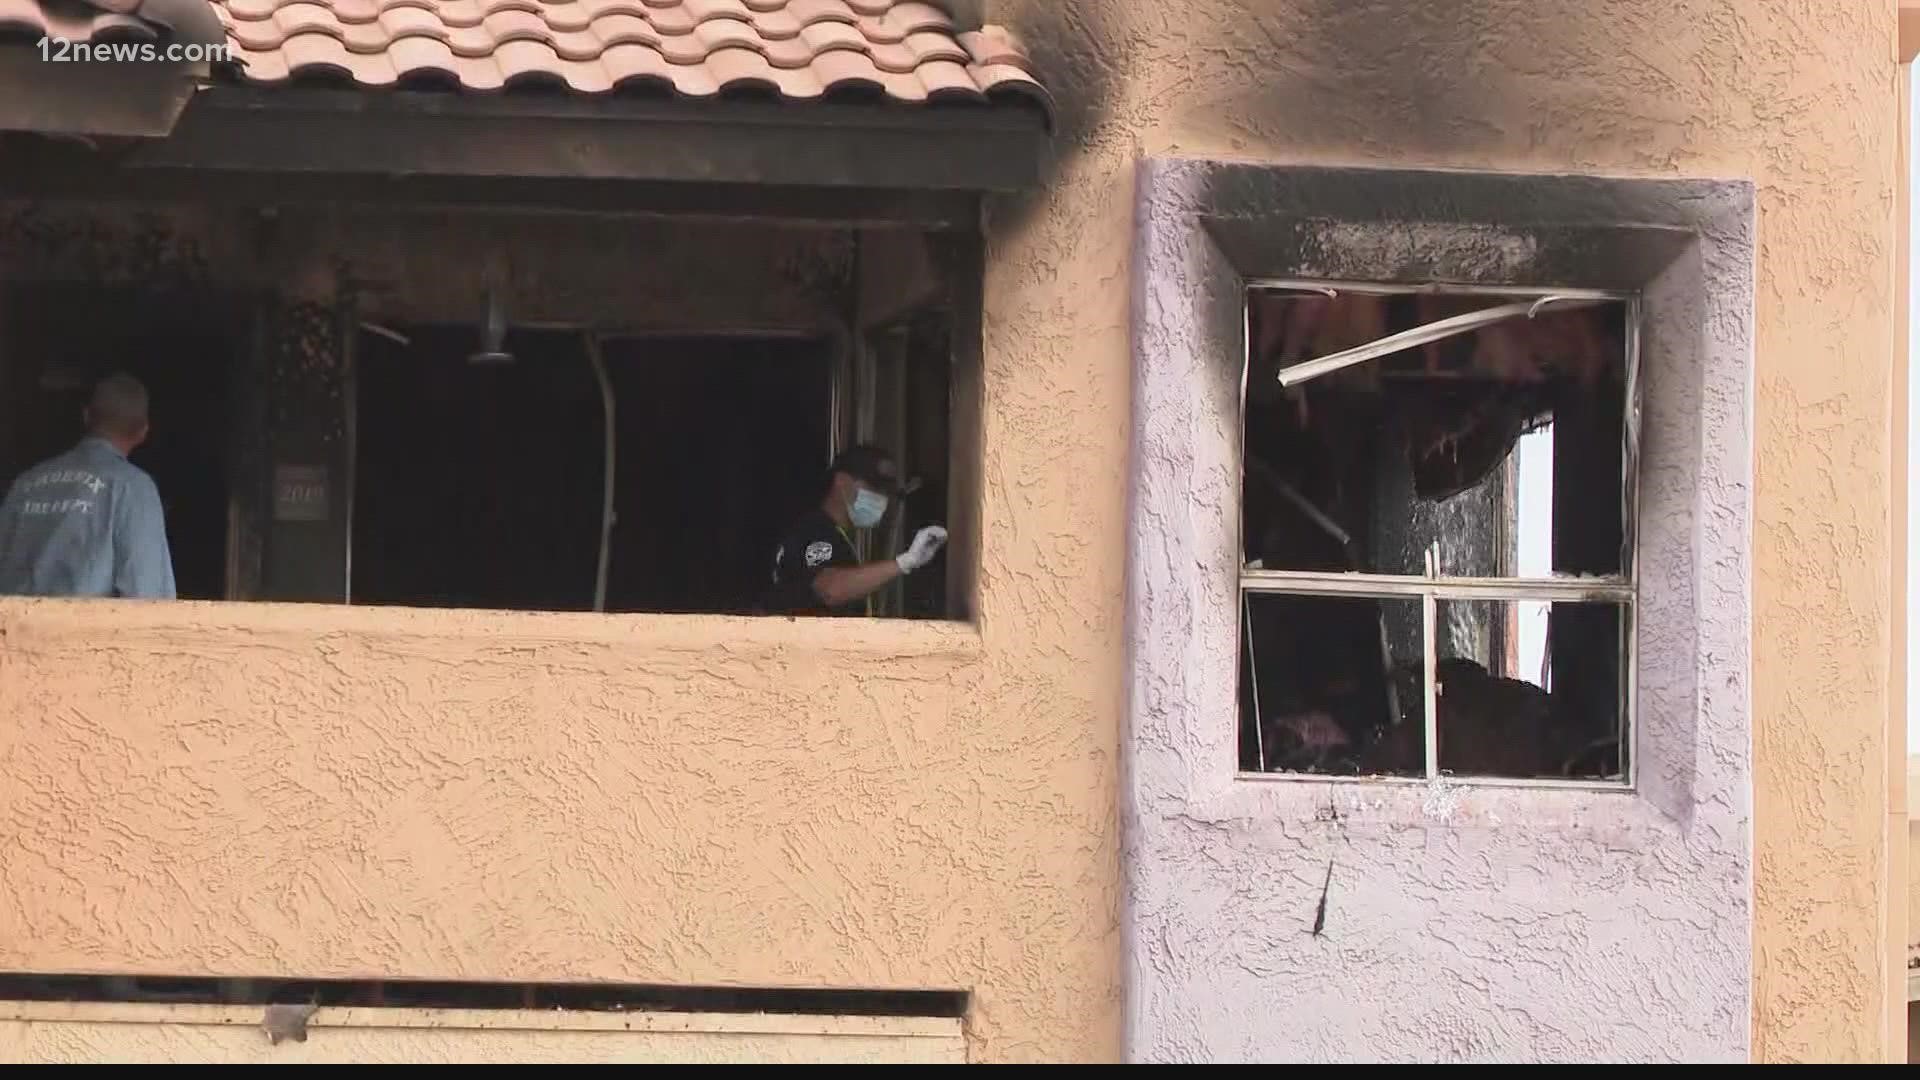 Phoenix PD said a man in a mental health crisis set fire to his apartment before jumping out of the window. It happened near 70th Ave and Indian School Road.